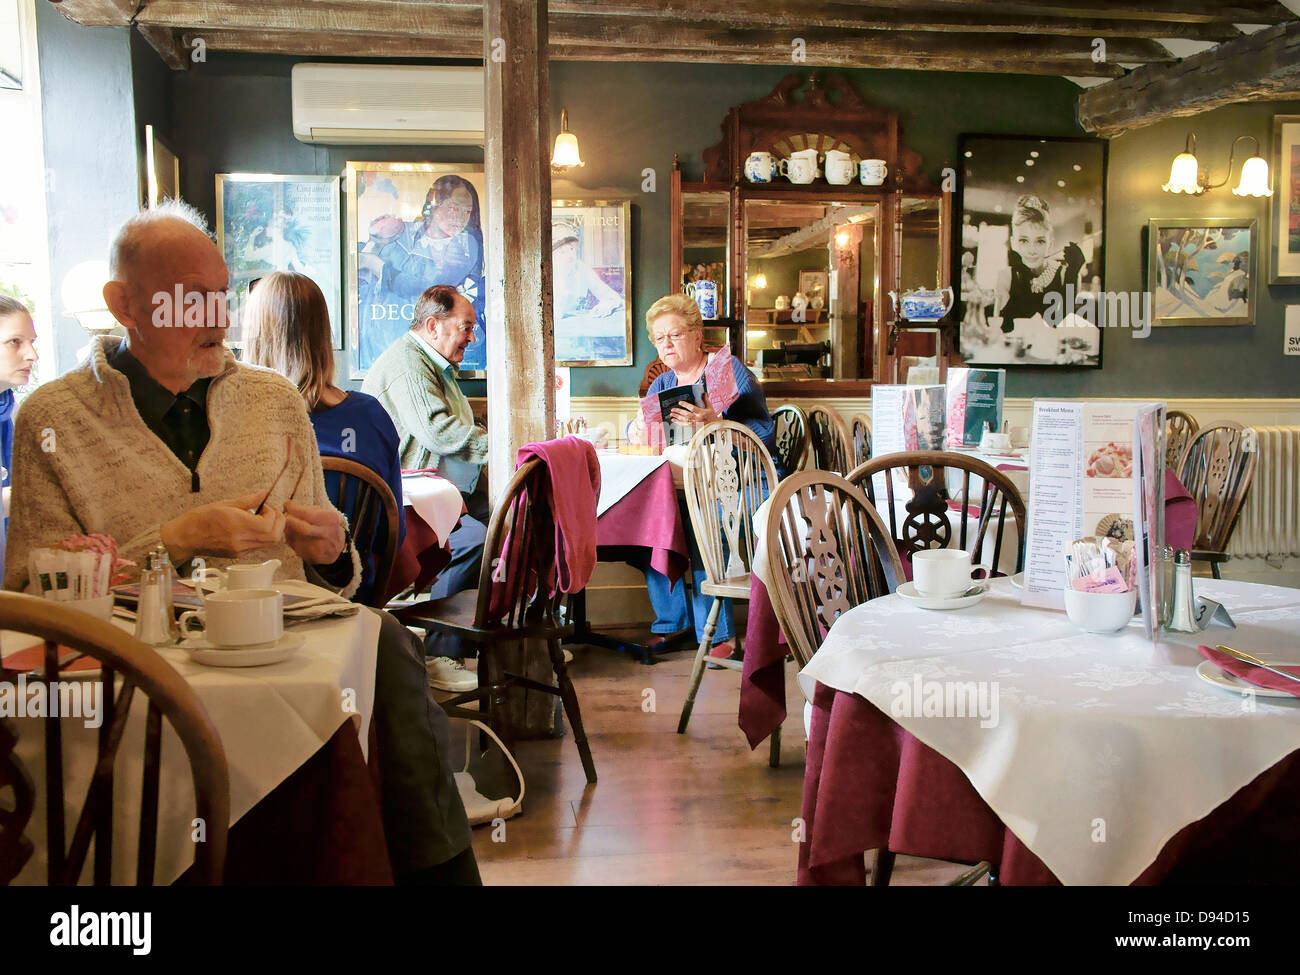 Interior of the traditional Polly Tea Rooms on the High Street of the Wiltshire town of Marlborough, England Stock Photo